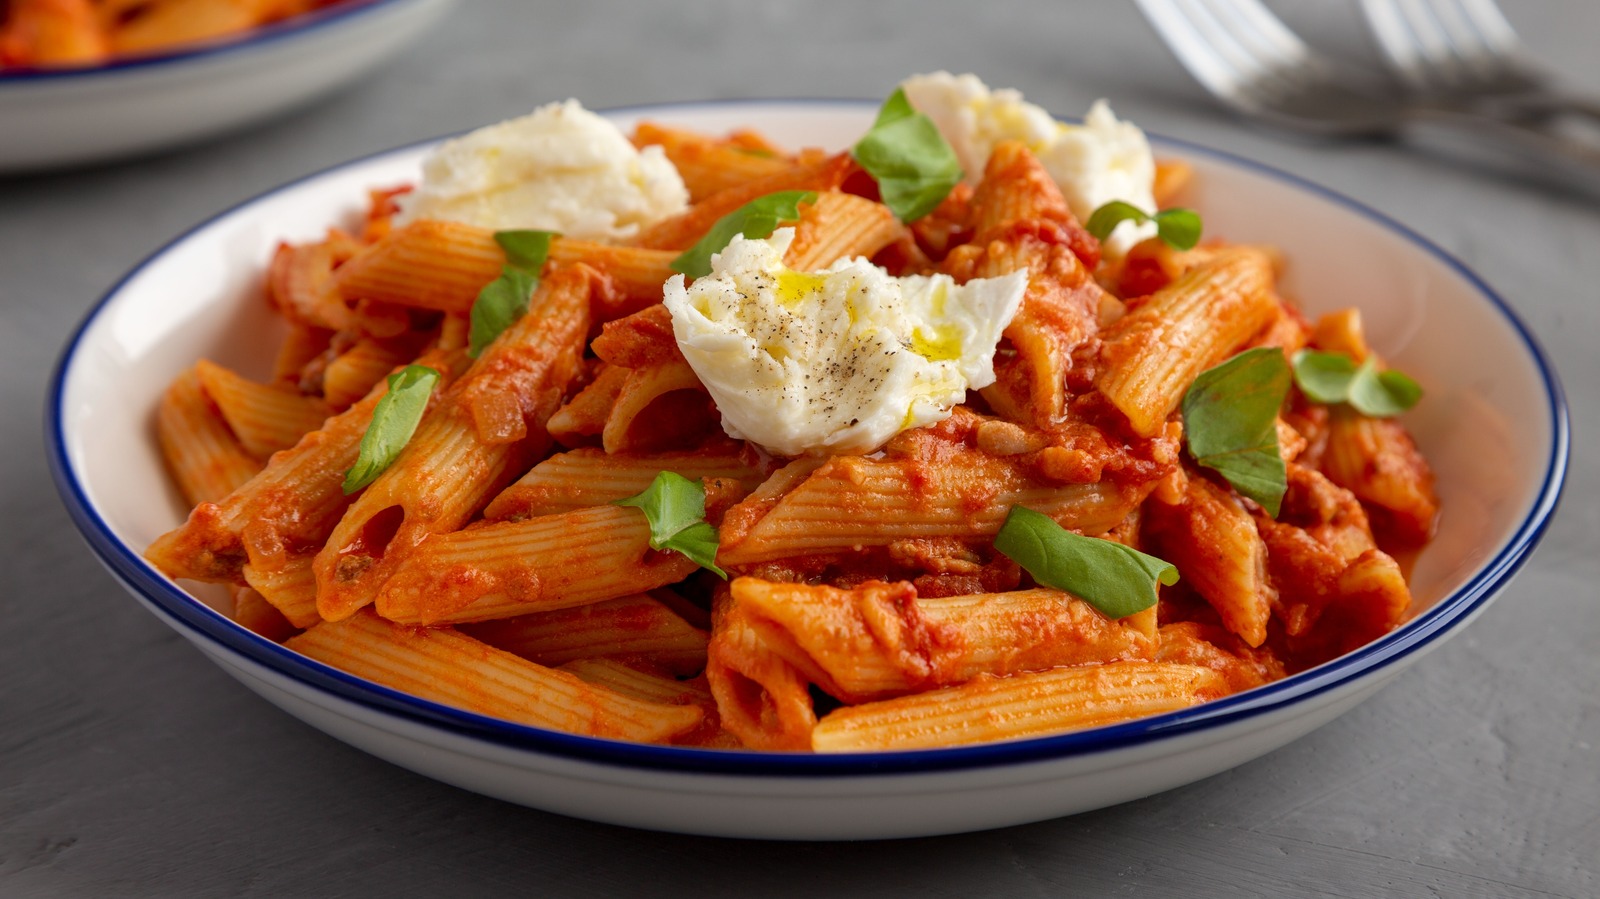 Why Traditional Vodka Sauce Isn't Vegetarian-Friendly